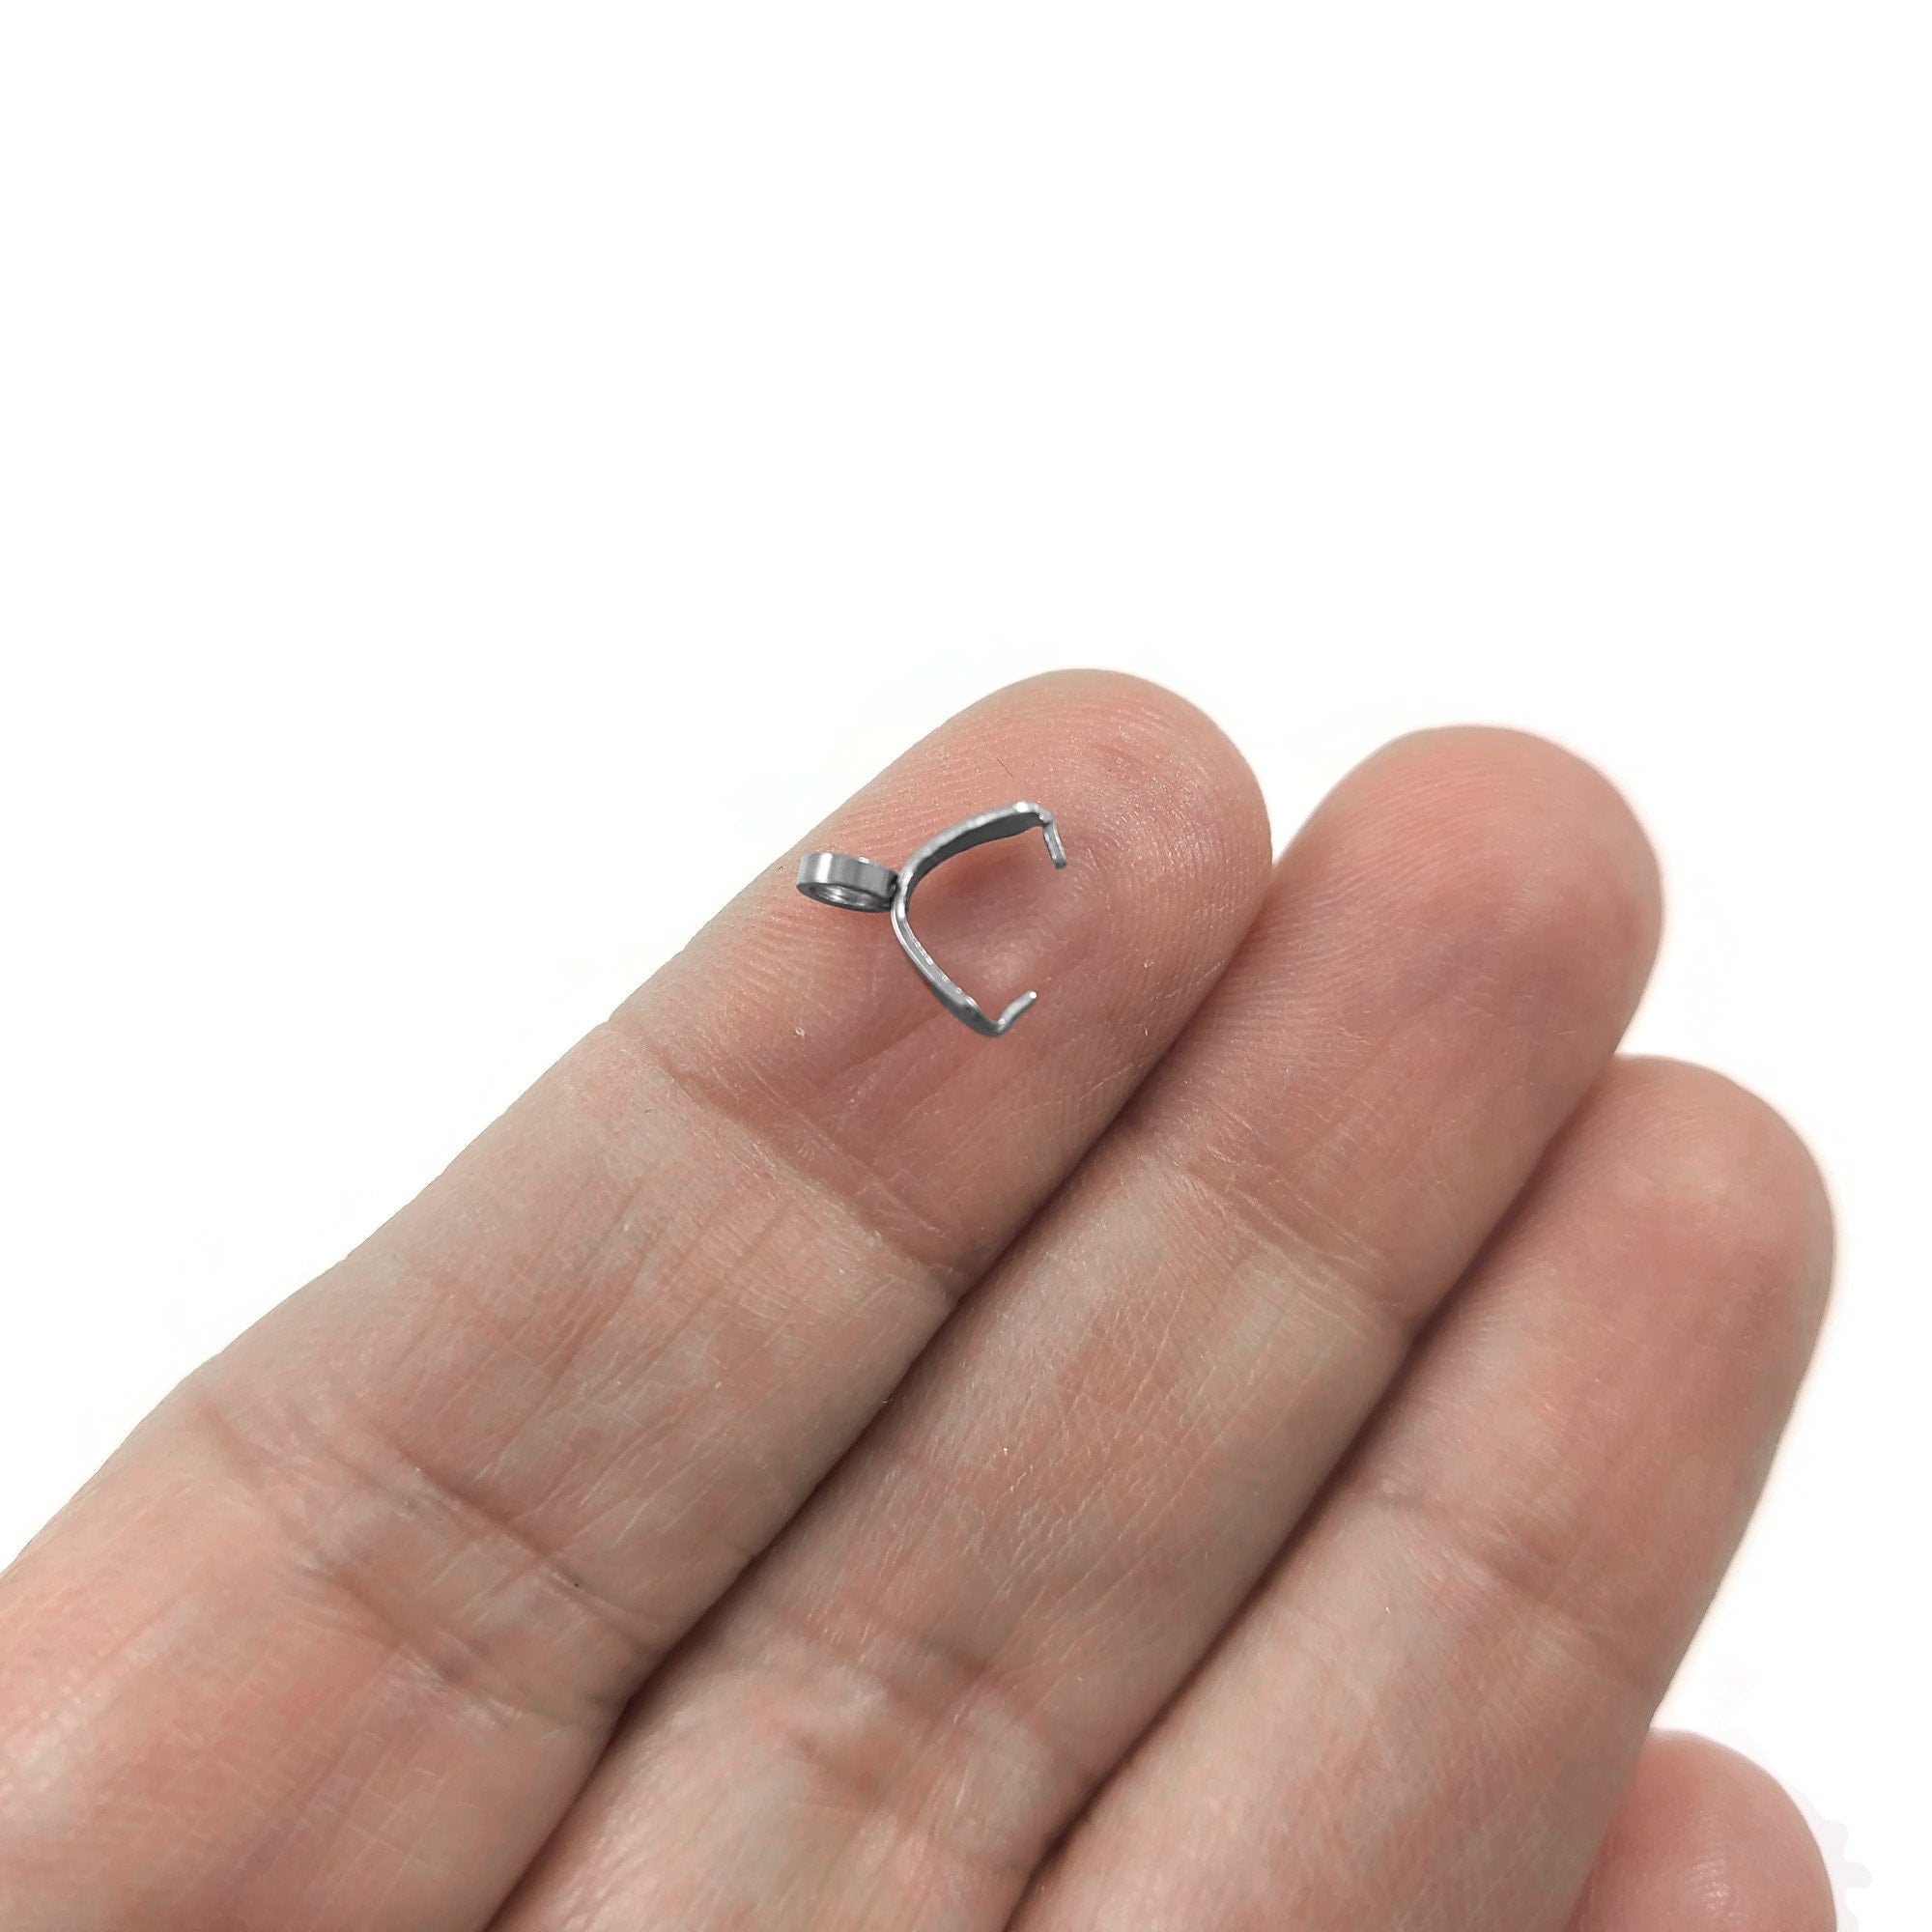 Ice pick pinch bails, Stainless steel tarnish free jewelry findings, Pendant making clip on clasps